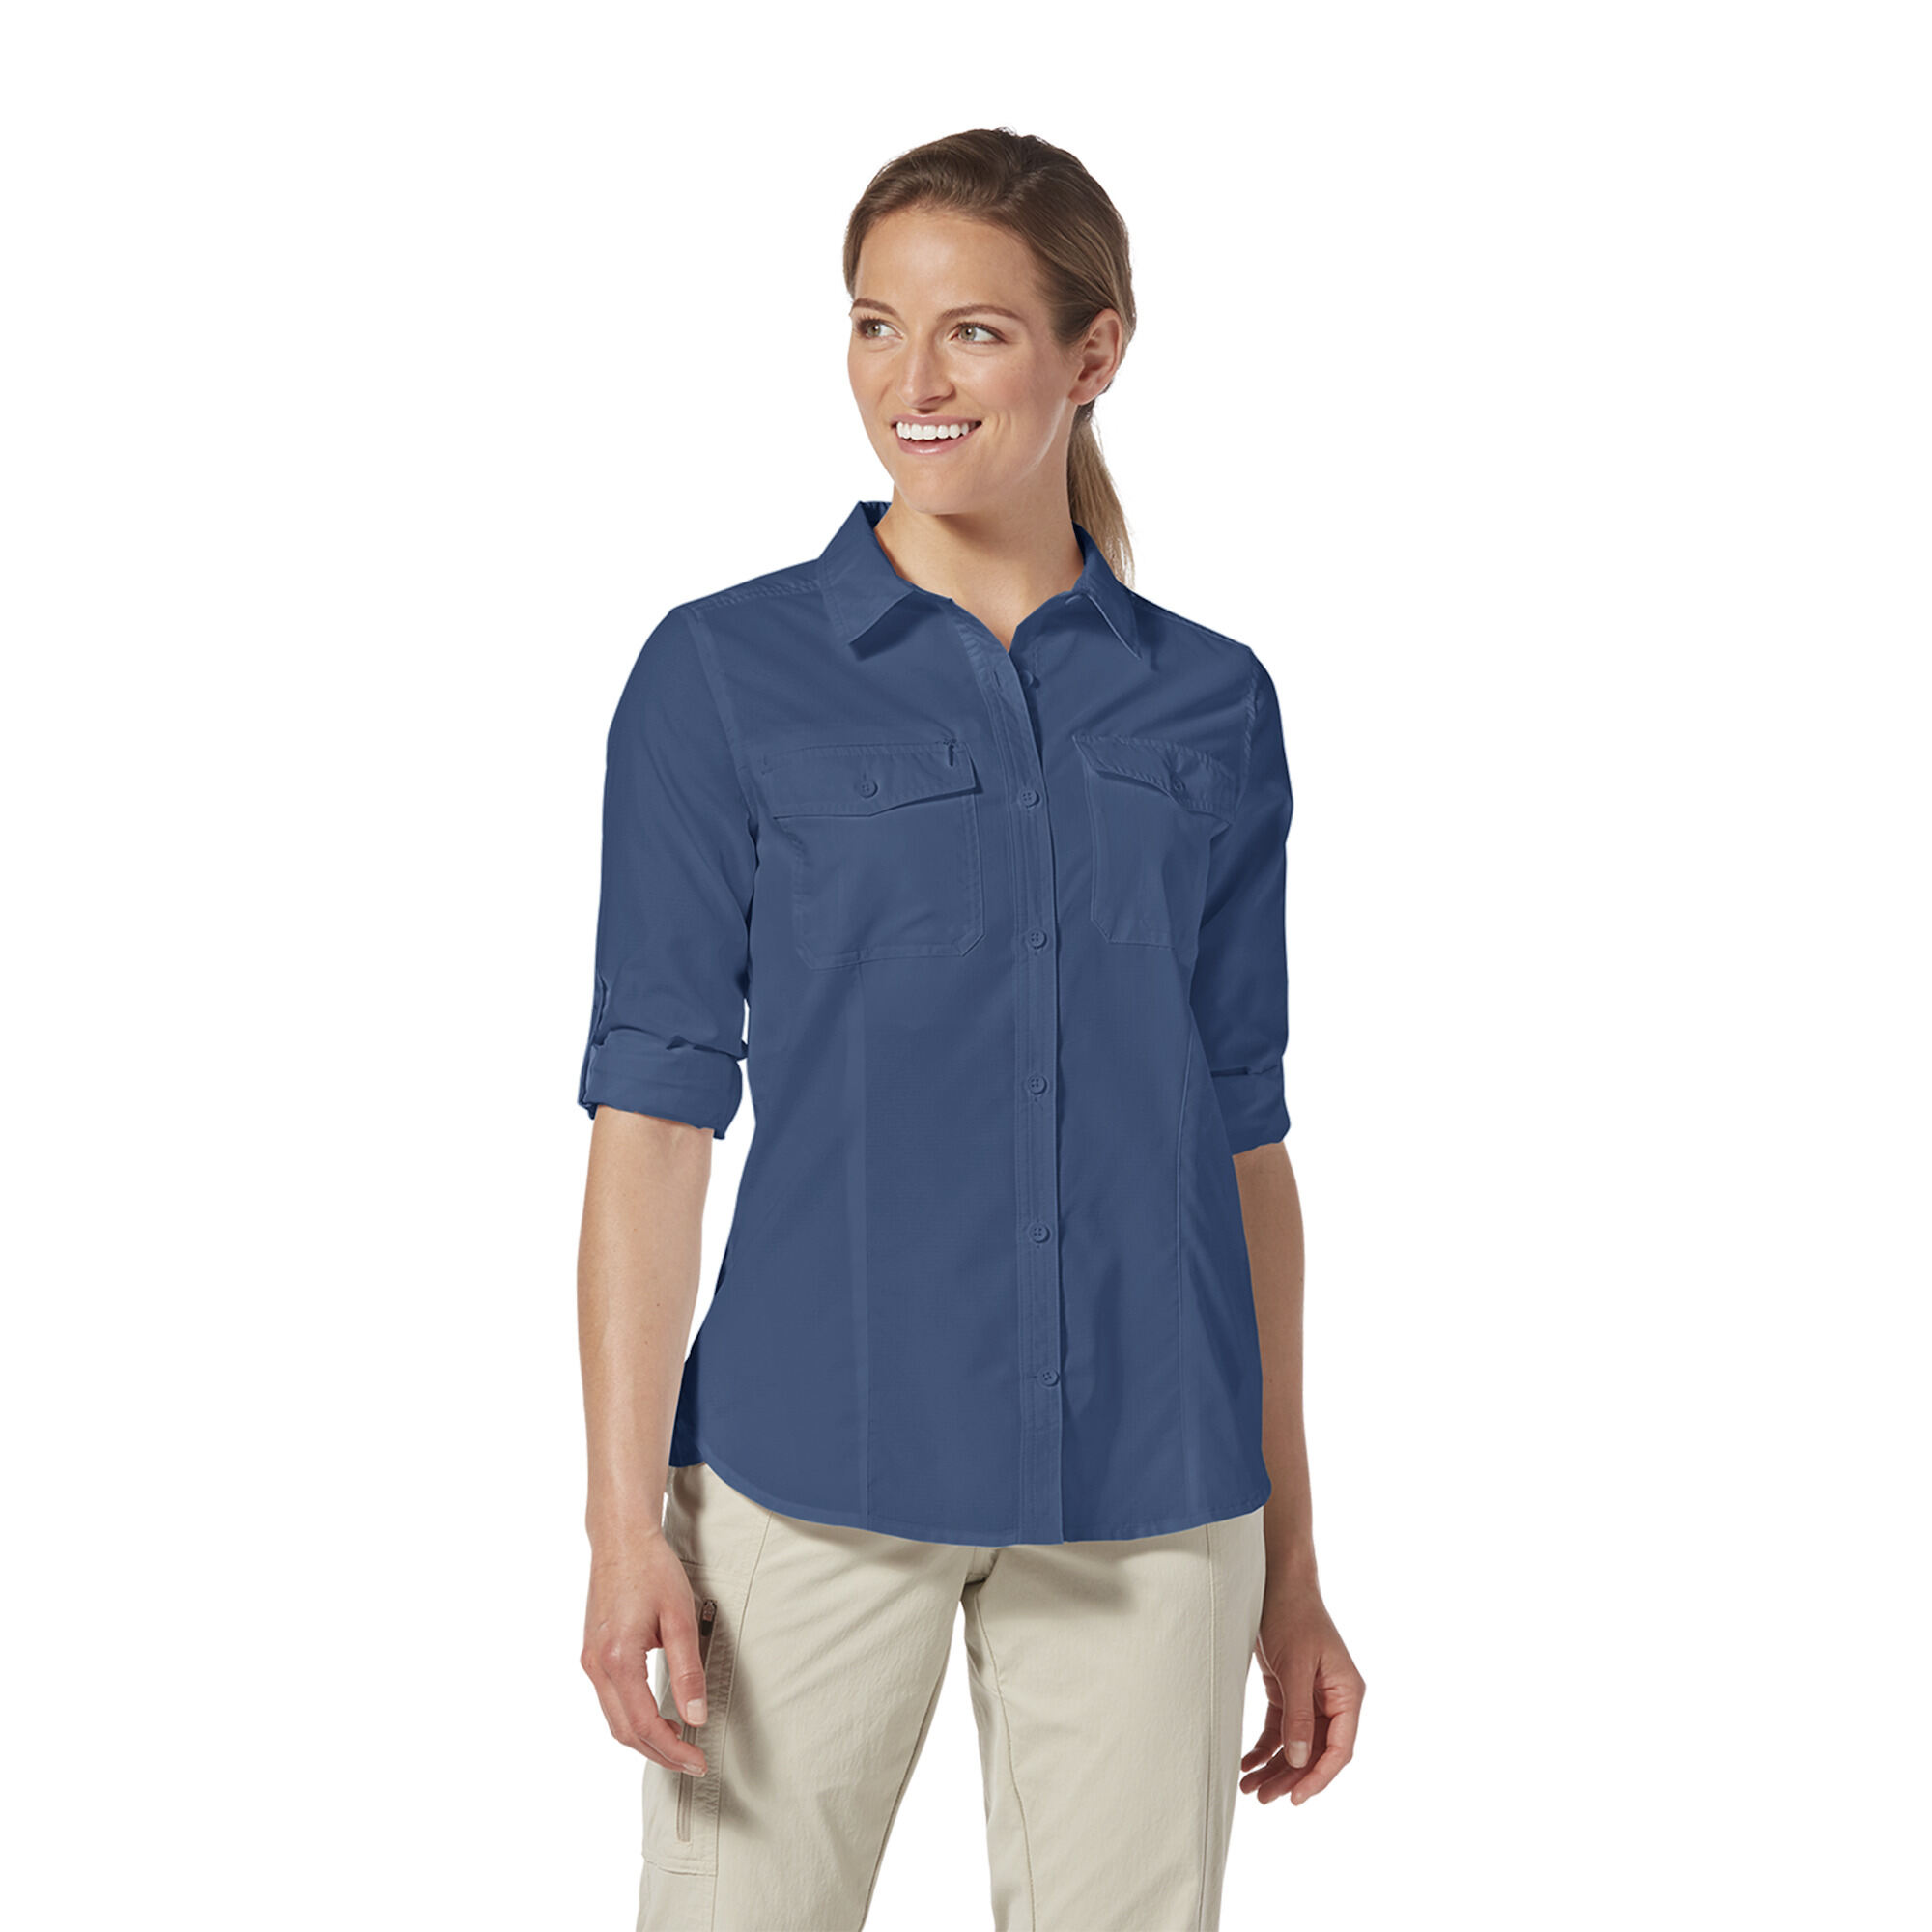 Women's Expedition Outdoor Clothing | Royal Robbins